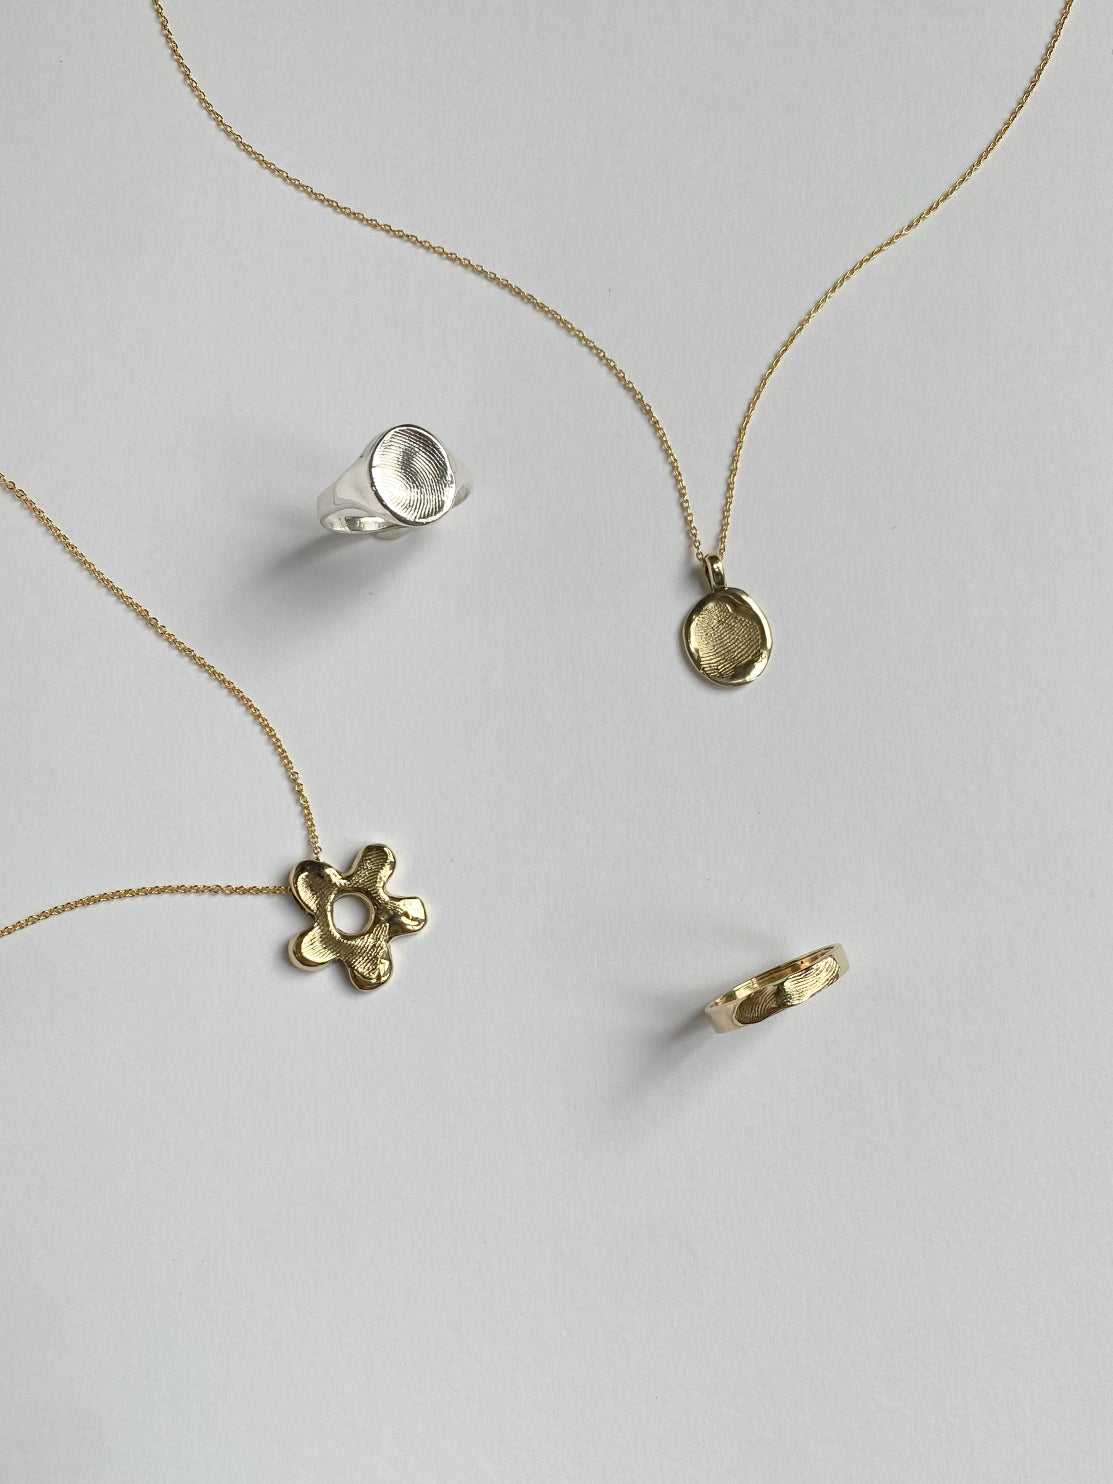 Selection of 2 pendants and 2 rings with fingerprints pressed into surface on white background